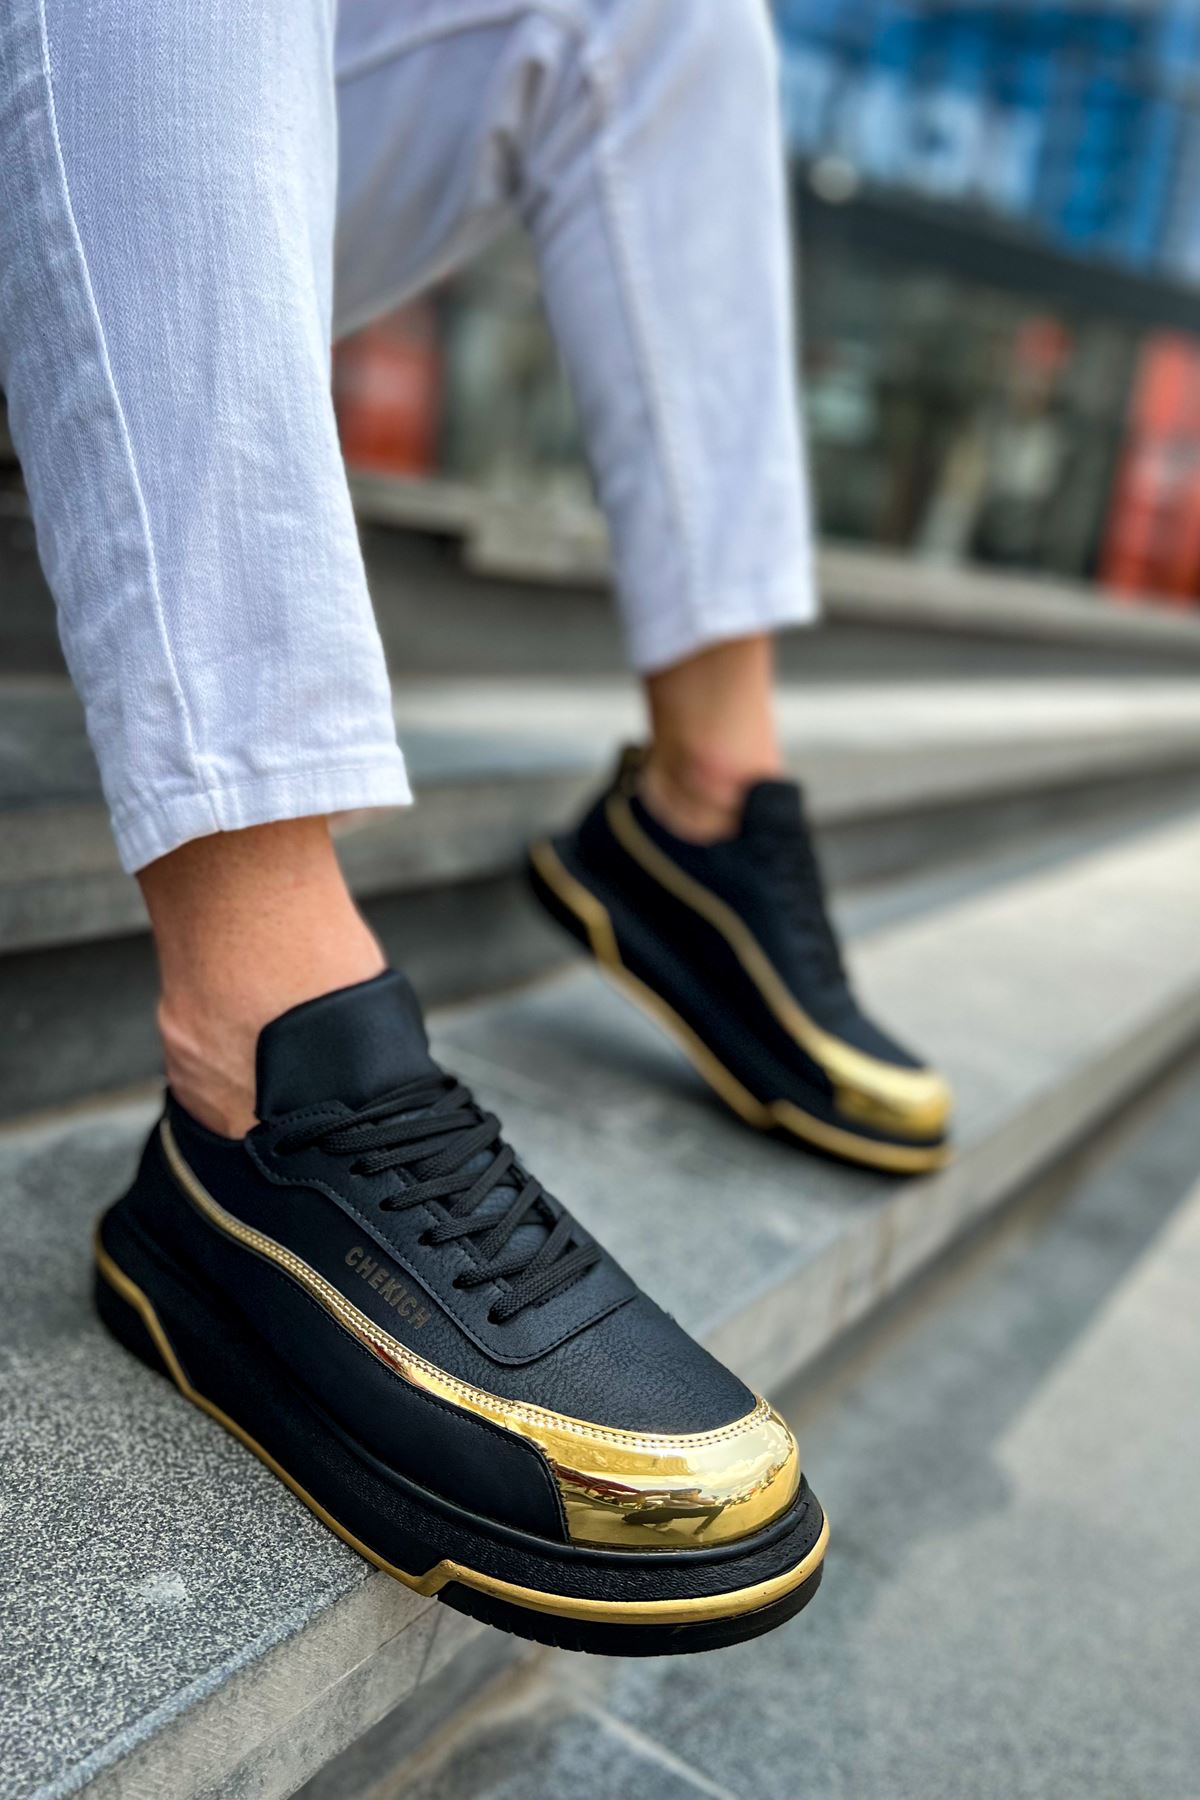 CH041 ST Men's Sneaker Shoes BLACK / GOLD - STREETMODE ™